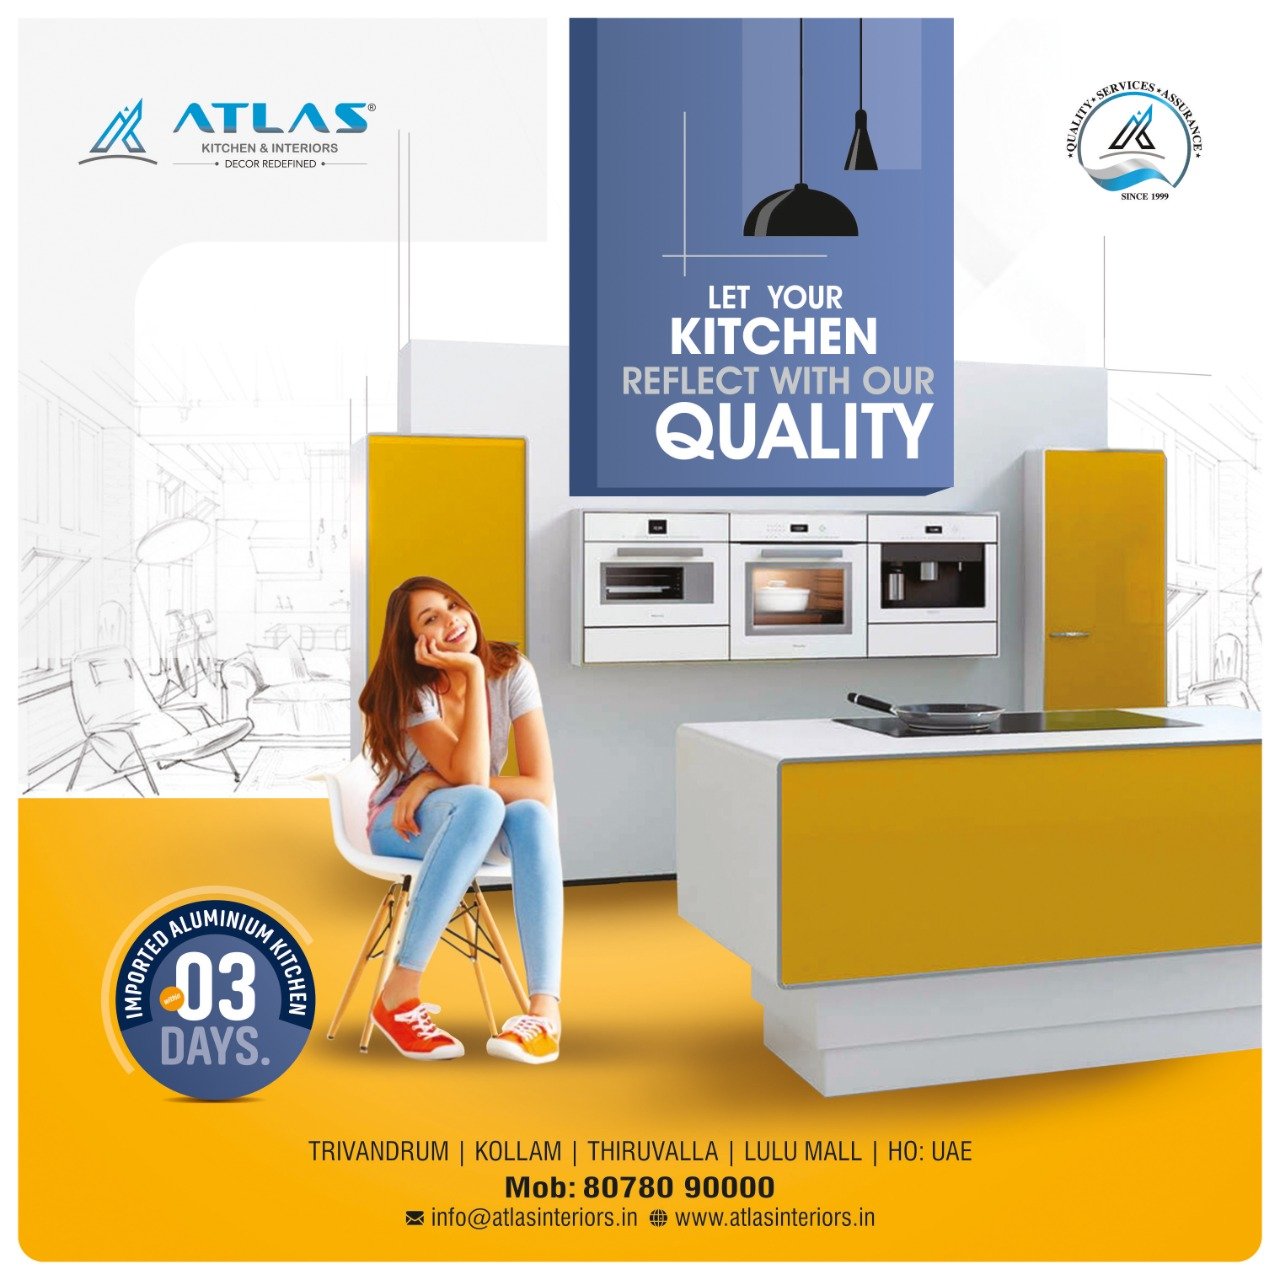 Let Your Kitchen Reflect With Our Quality